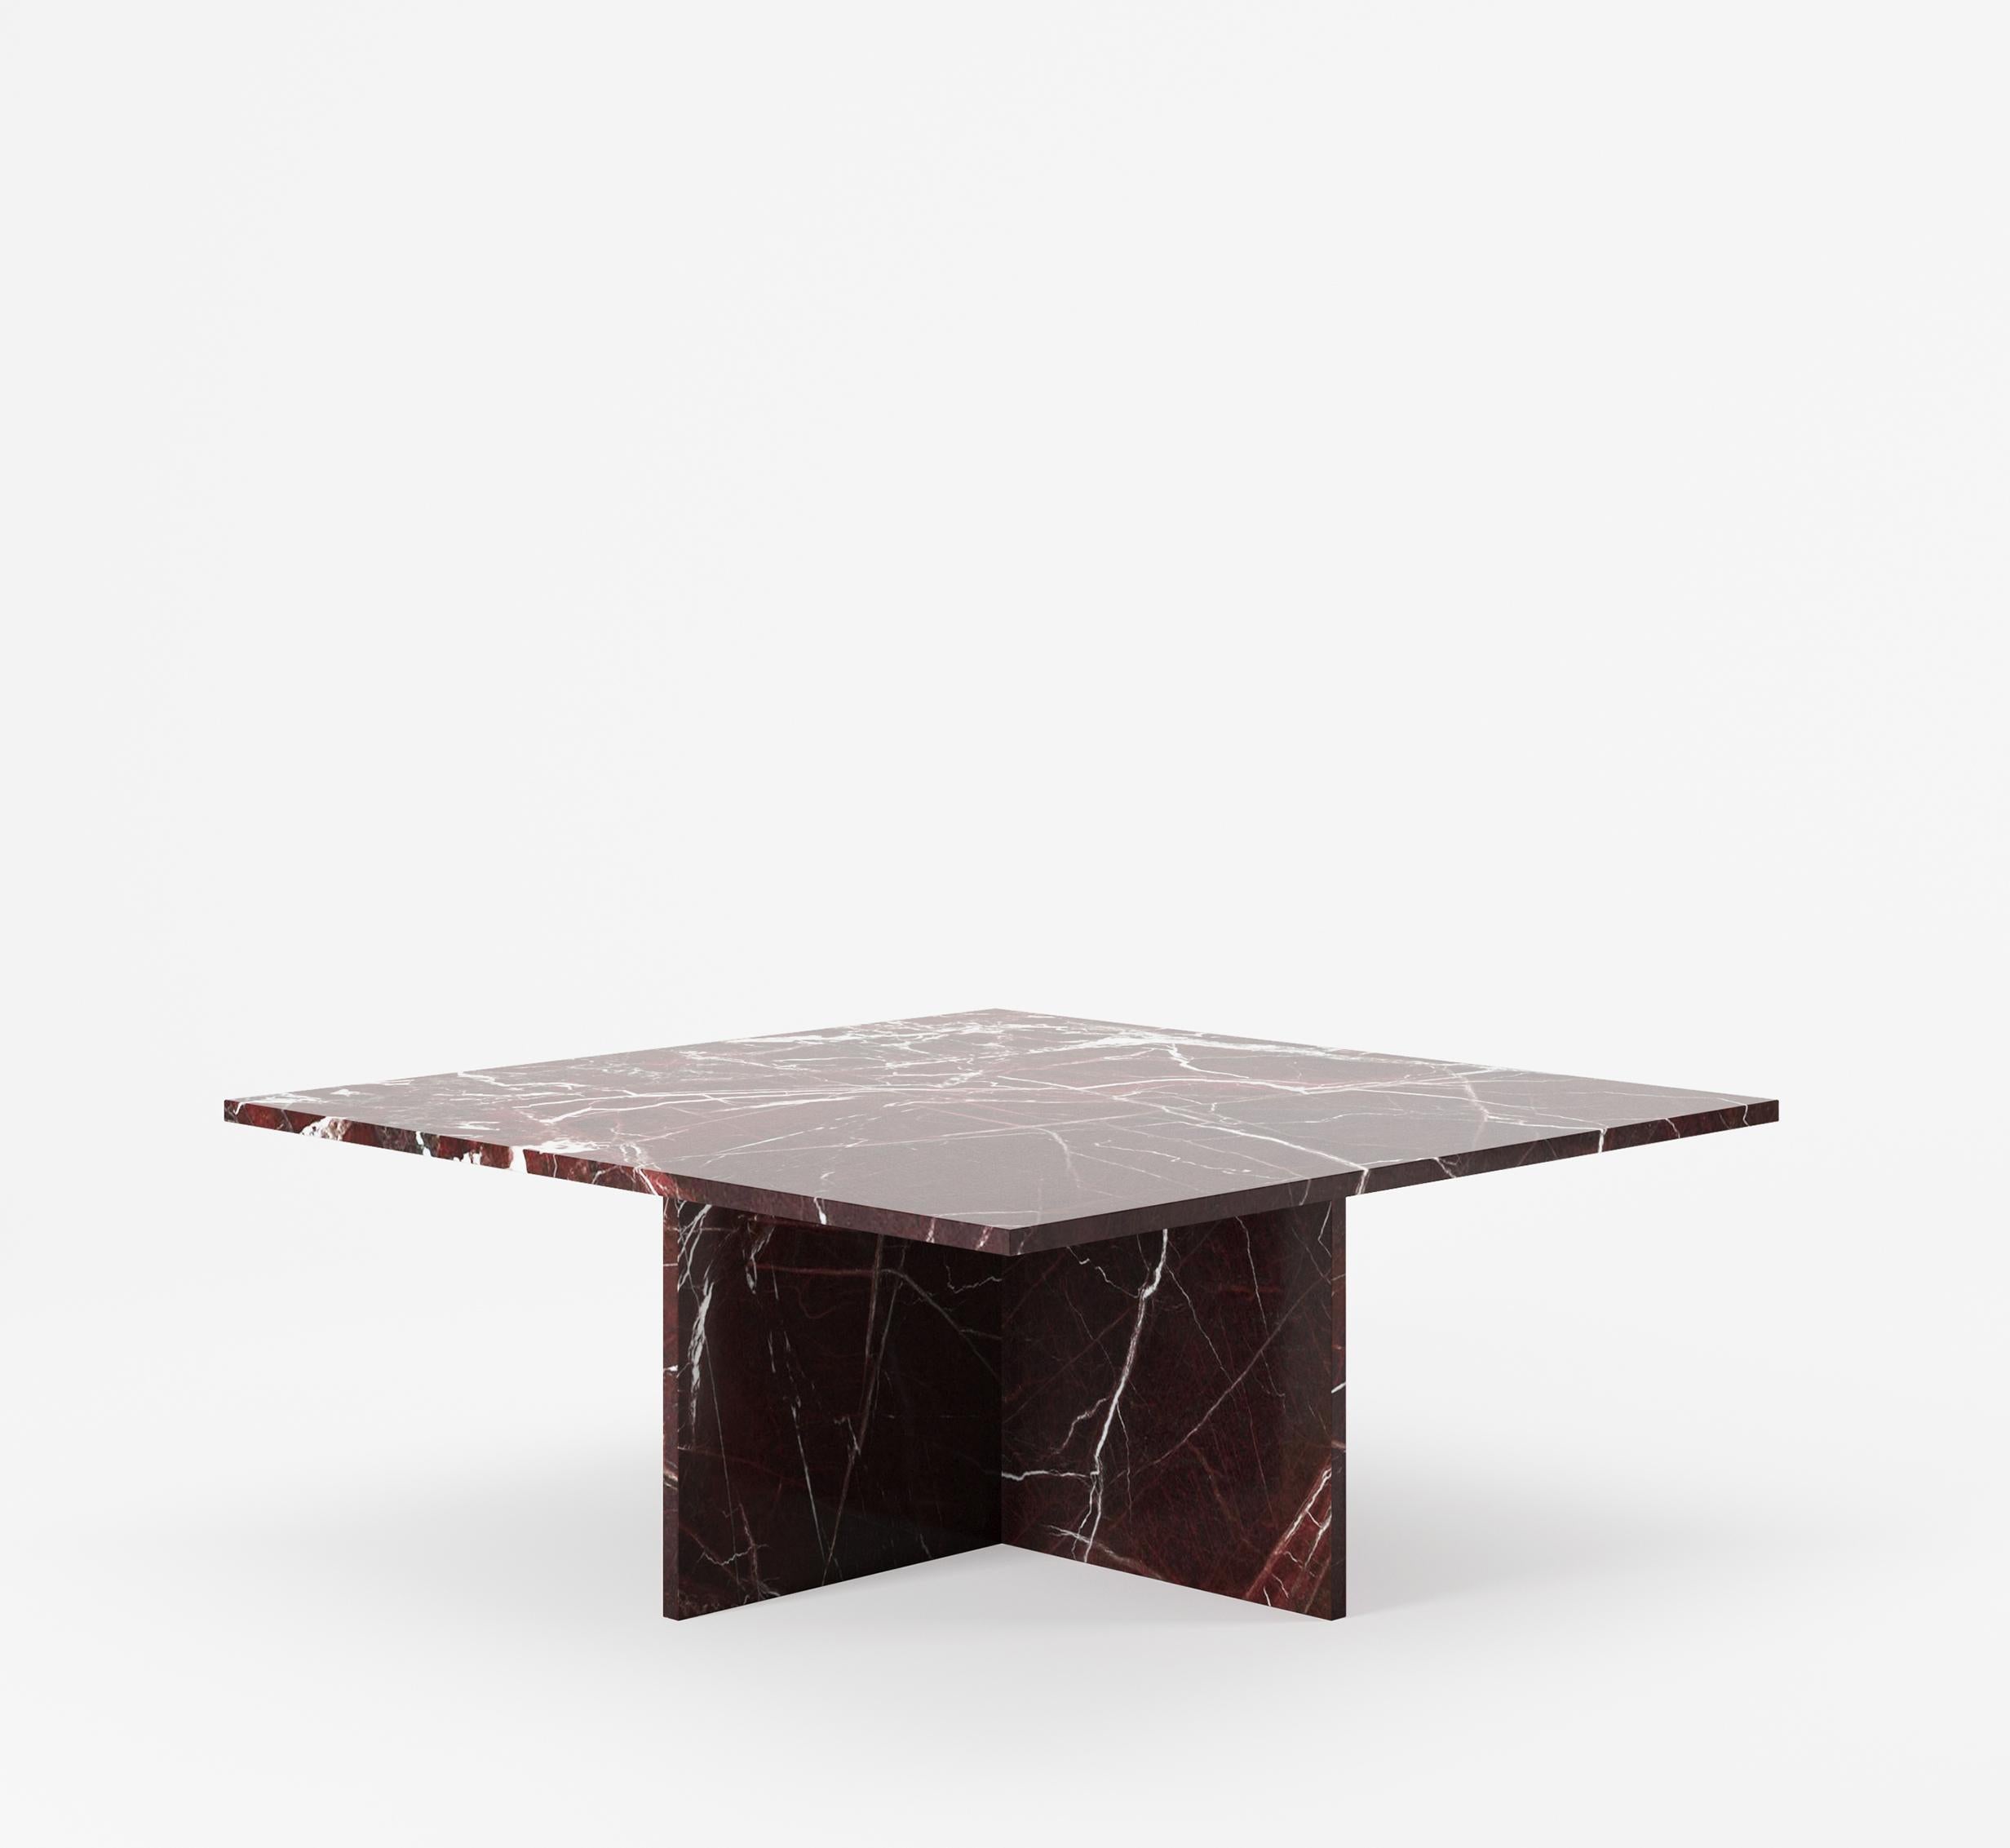 Minimalist Vondel Square Table Handcrafted in Polished Rosso Levanto Marble